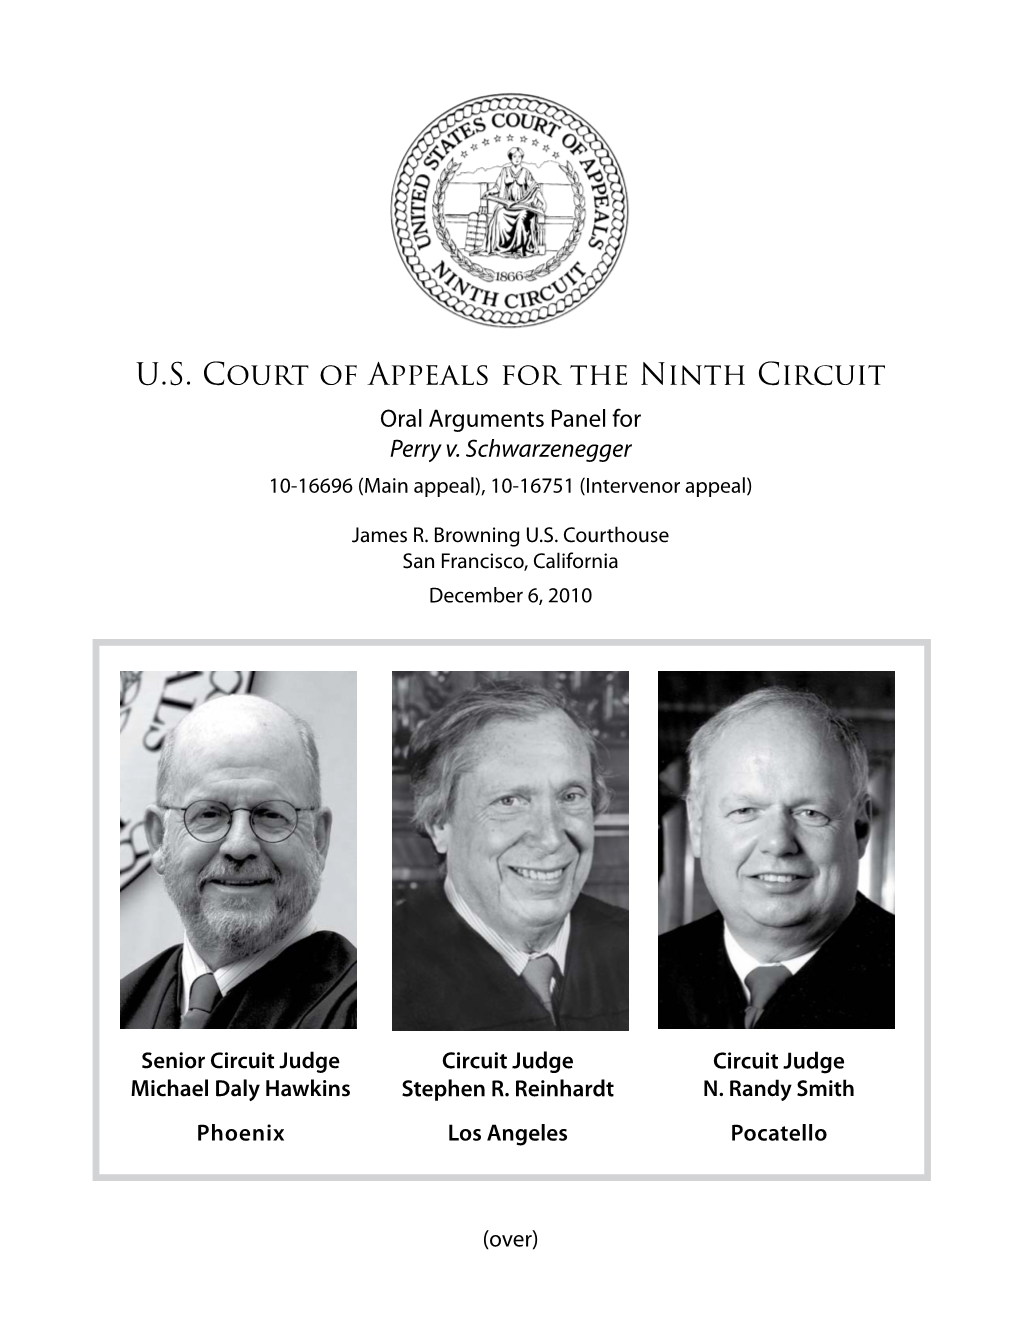 U.S. Court of Appeals for the Ninth Circuit Oral Arguments Panel for Perry V